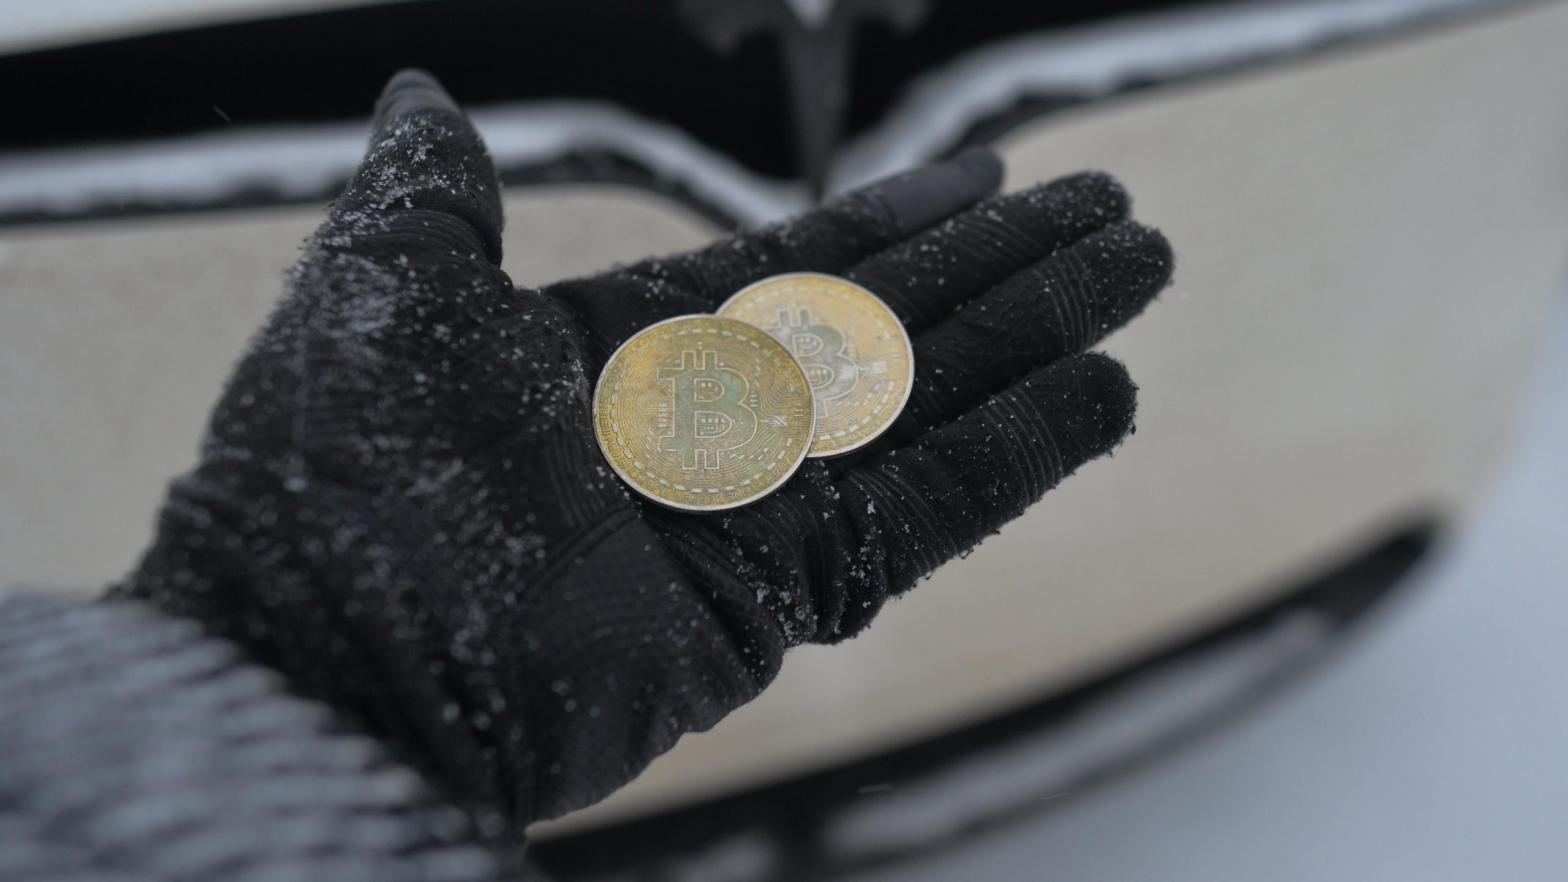 A person holding commemorative physical Bitcoin tokens in Edmonton, Alberta, Canada on Jan. 7, 2022. (Photo: Artur Widak / NurPhoto via Getty Images, Getty Images)